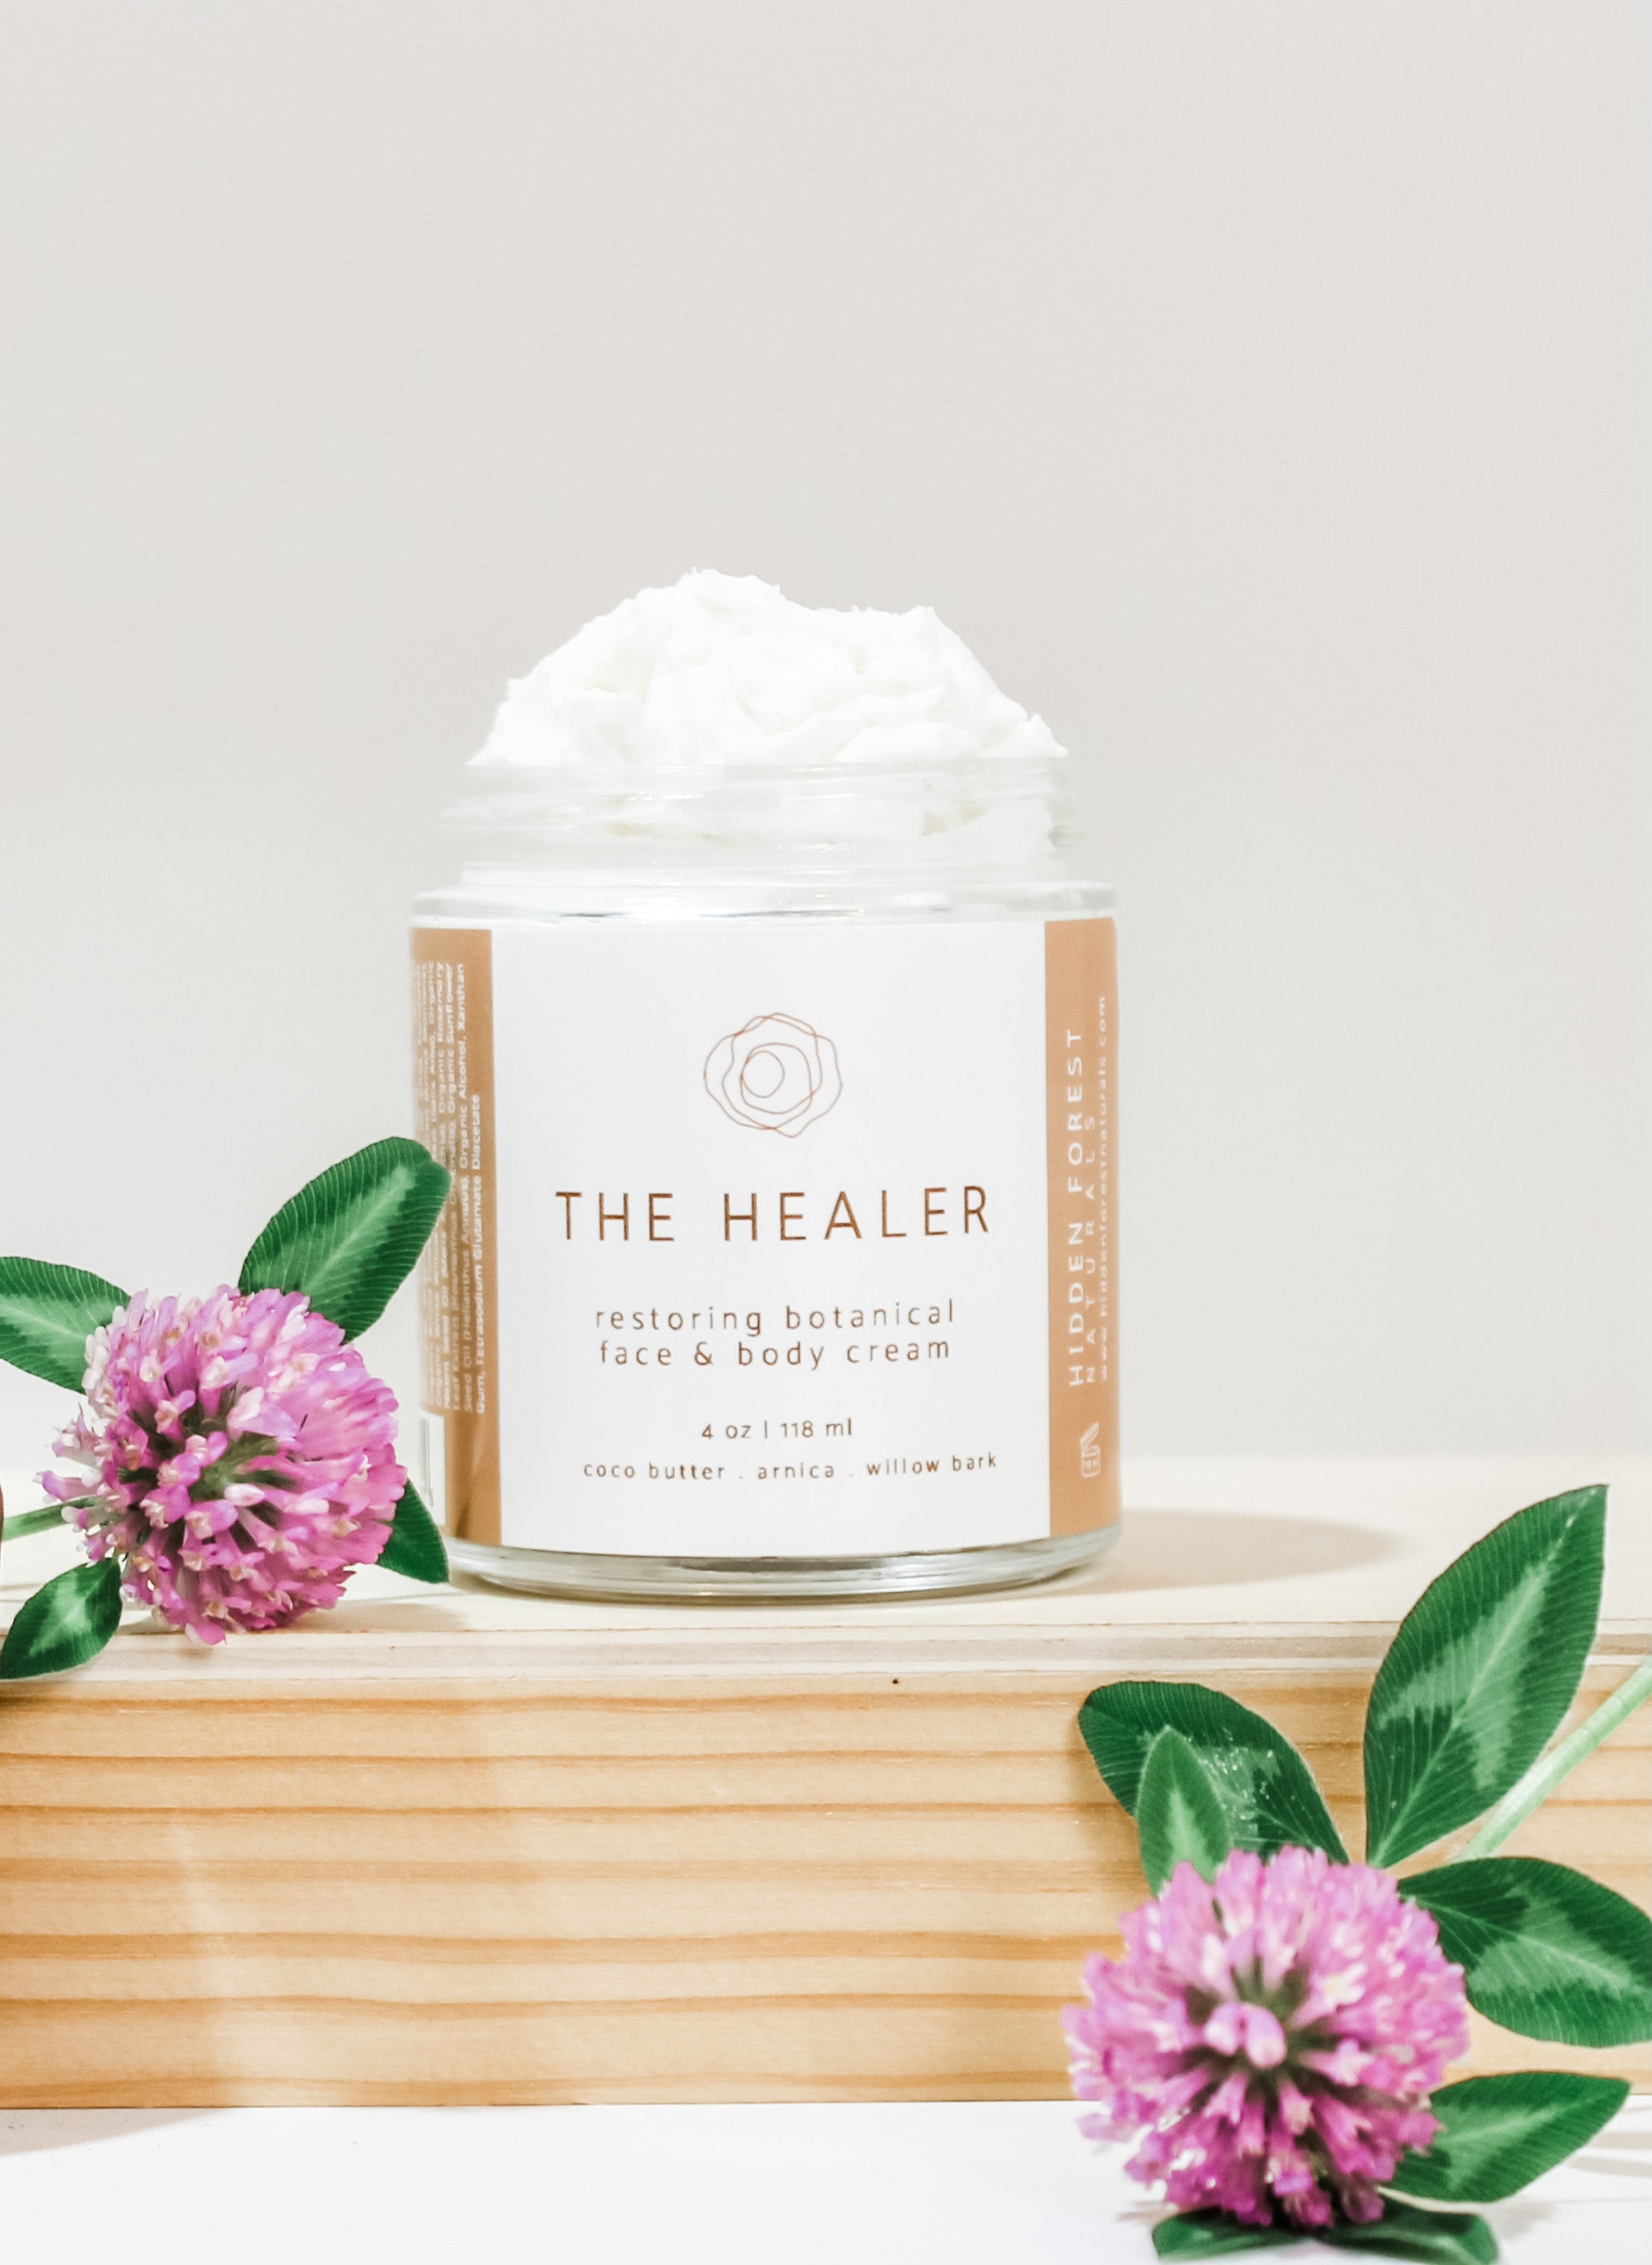 The Healer Botanical Vegan Cream - a remarkable solution infused with natural plant oils and lightweight yet potent ingredients